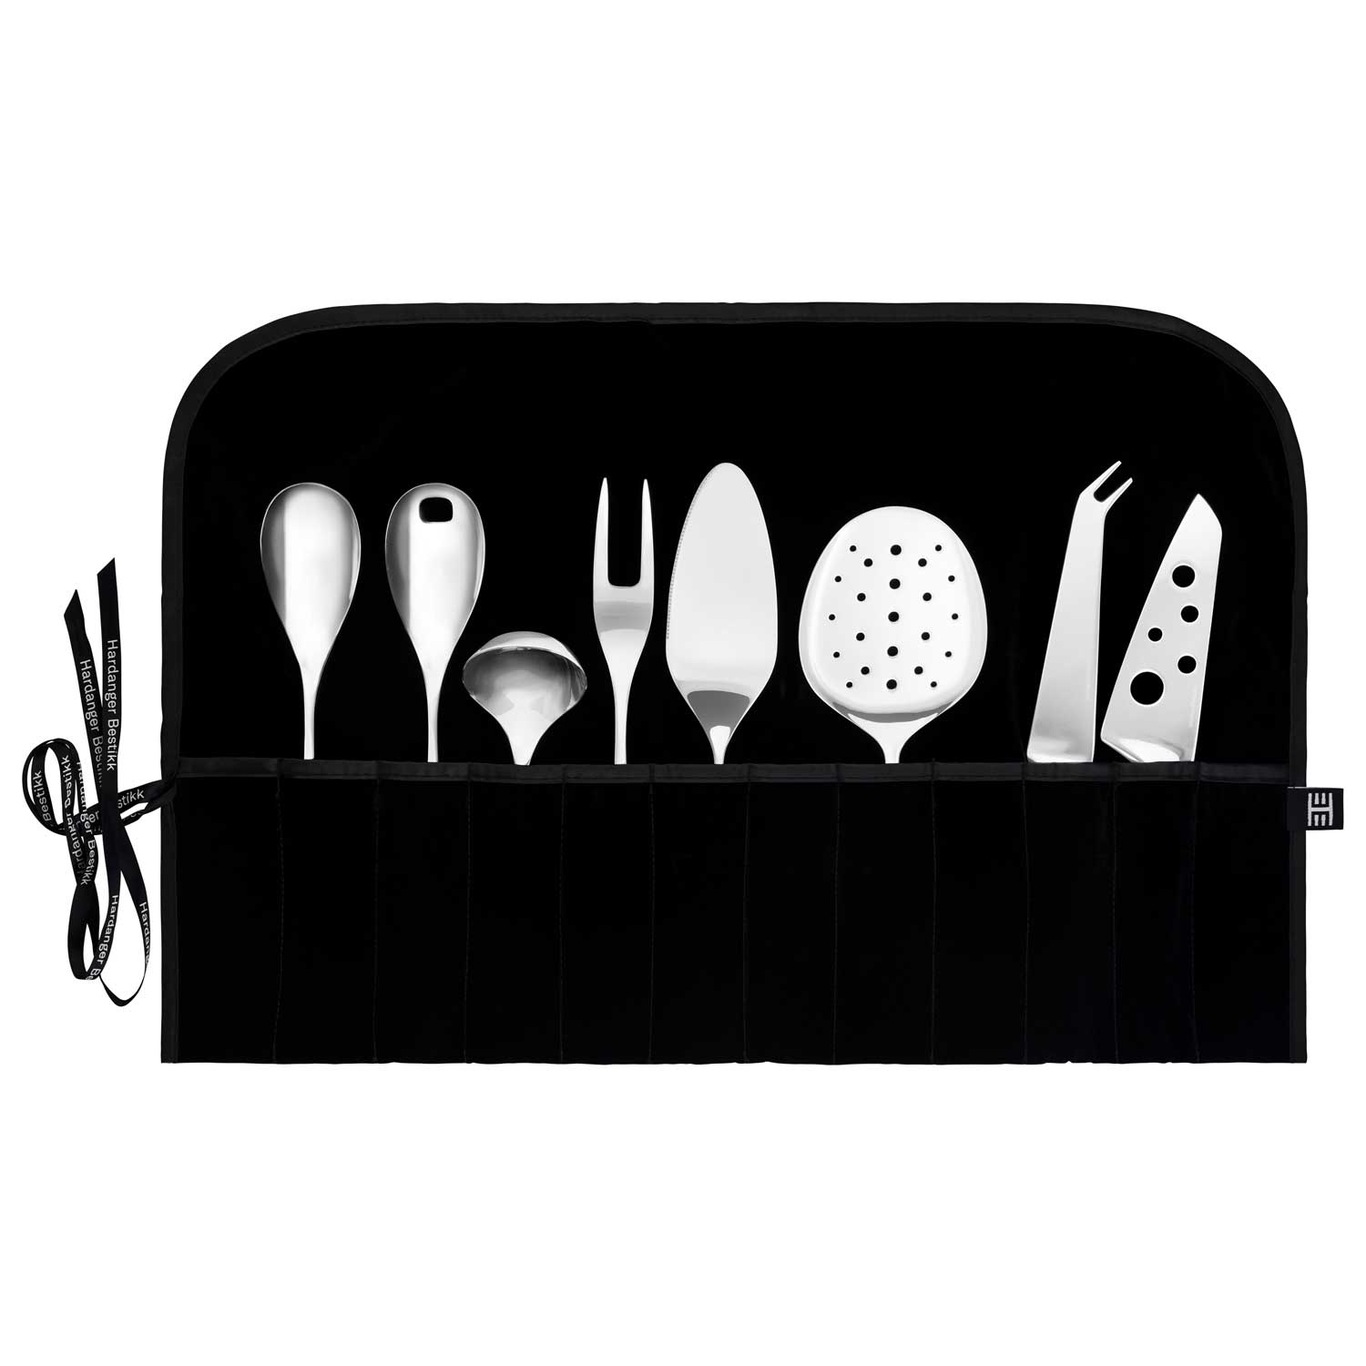 Cutlery Holder For Serving Cutlery